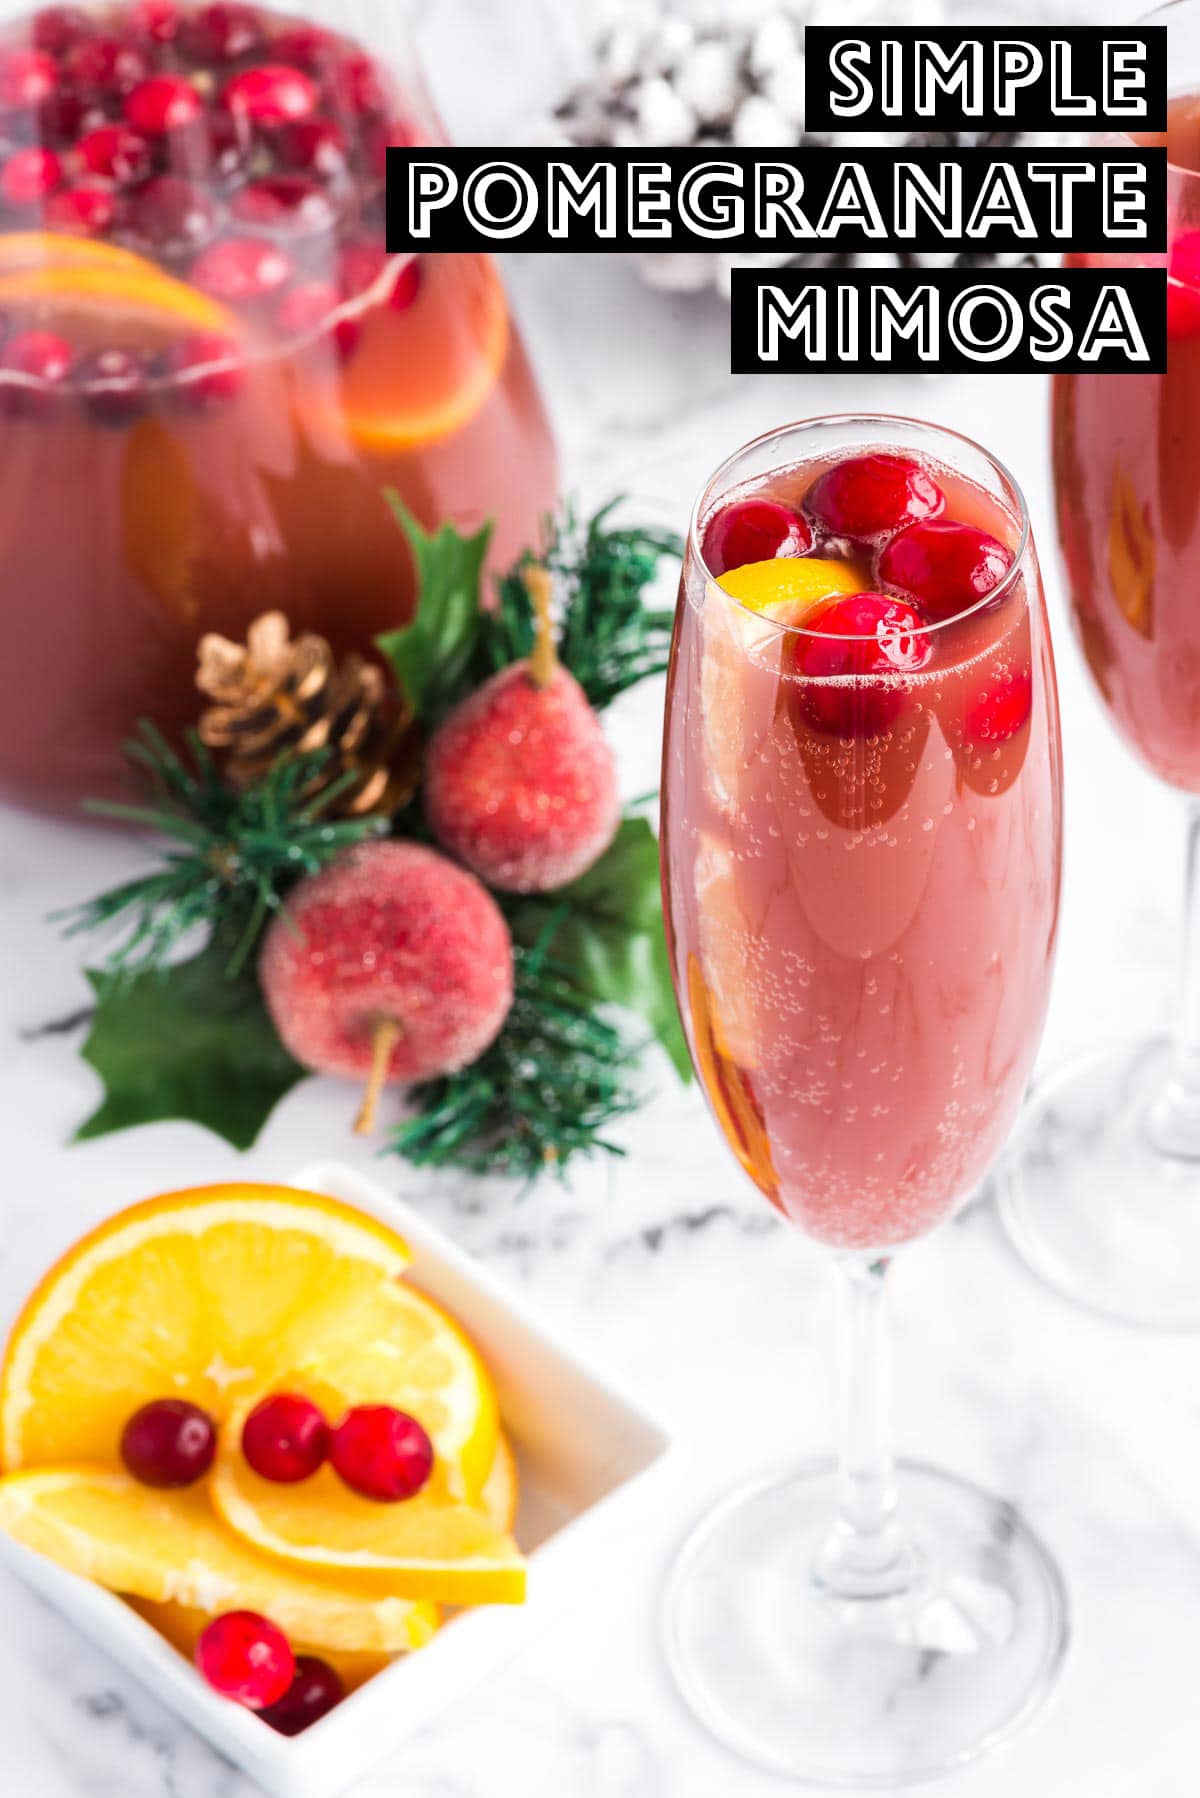 Red pomegranate mimosa in a champagne glass in front of pitcher